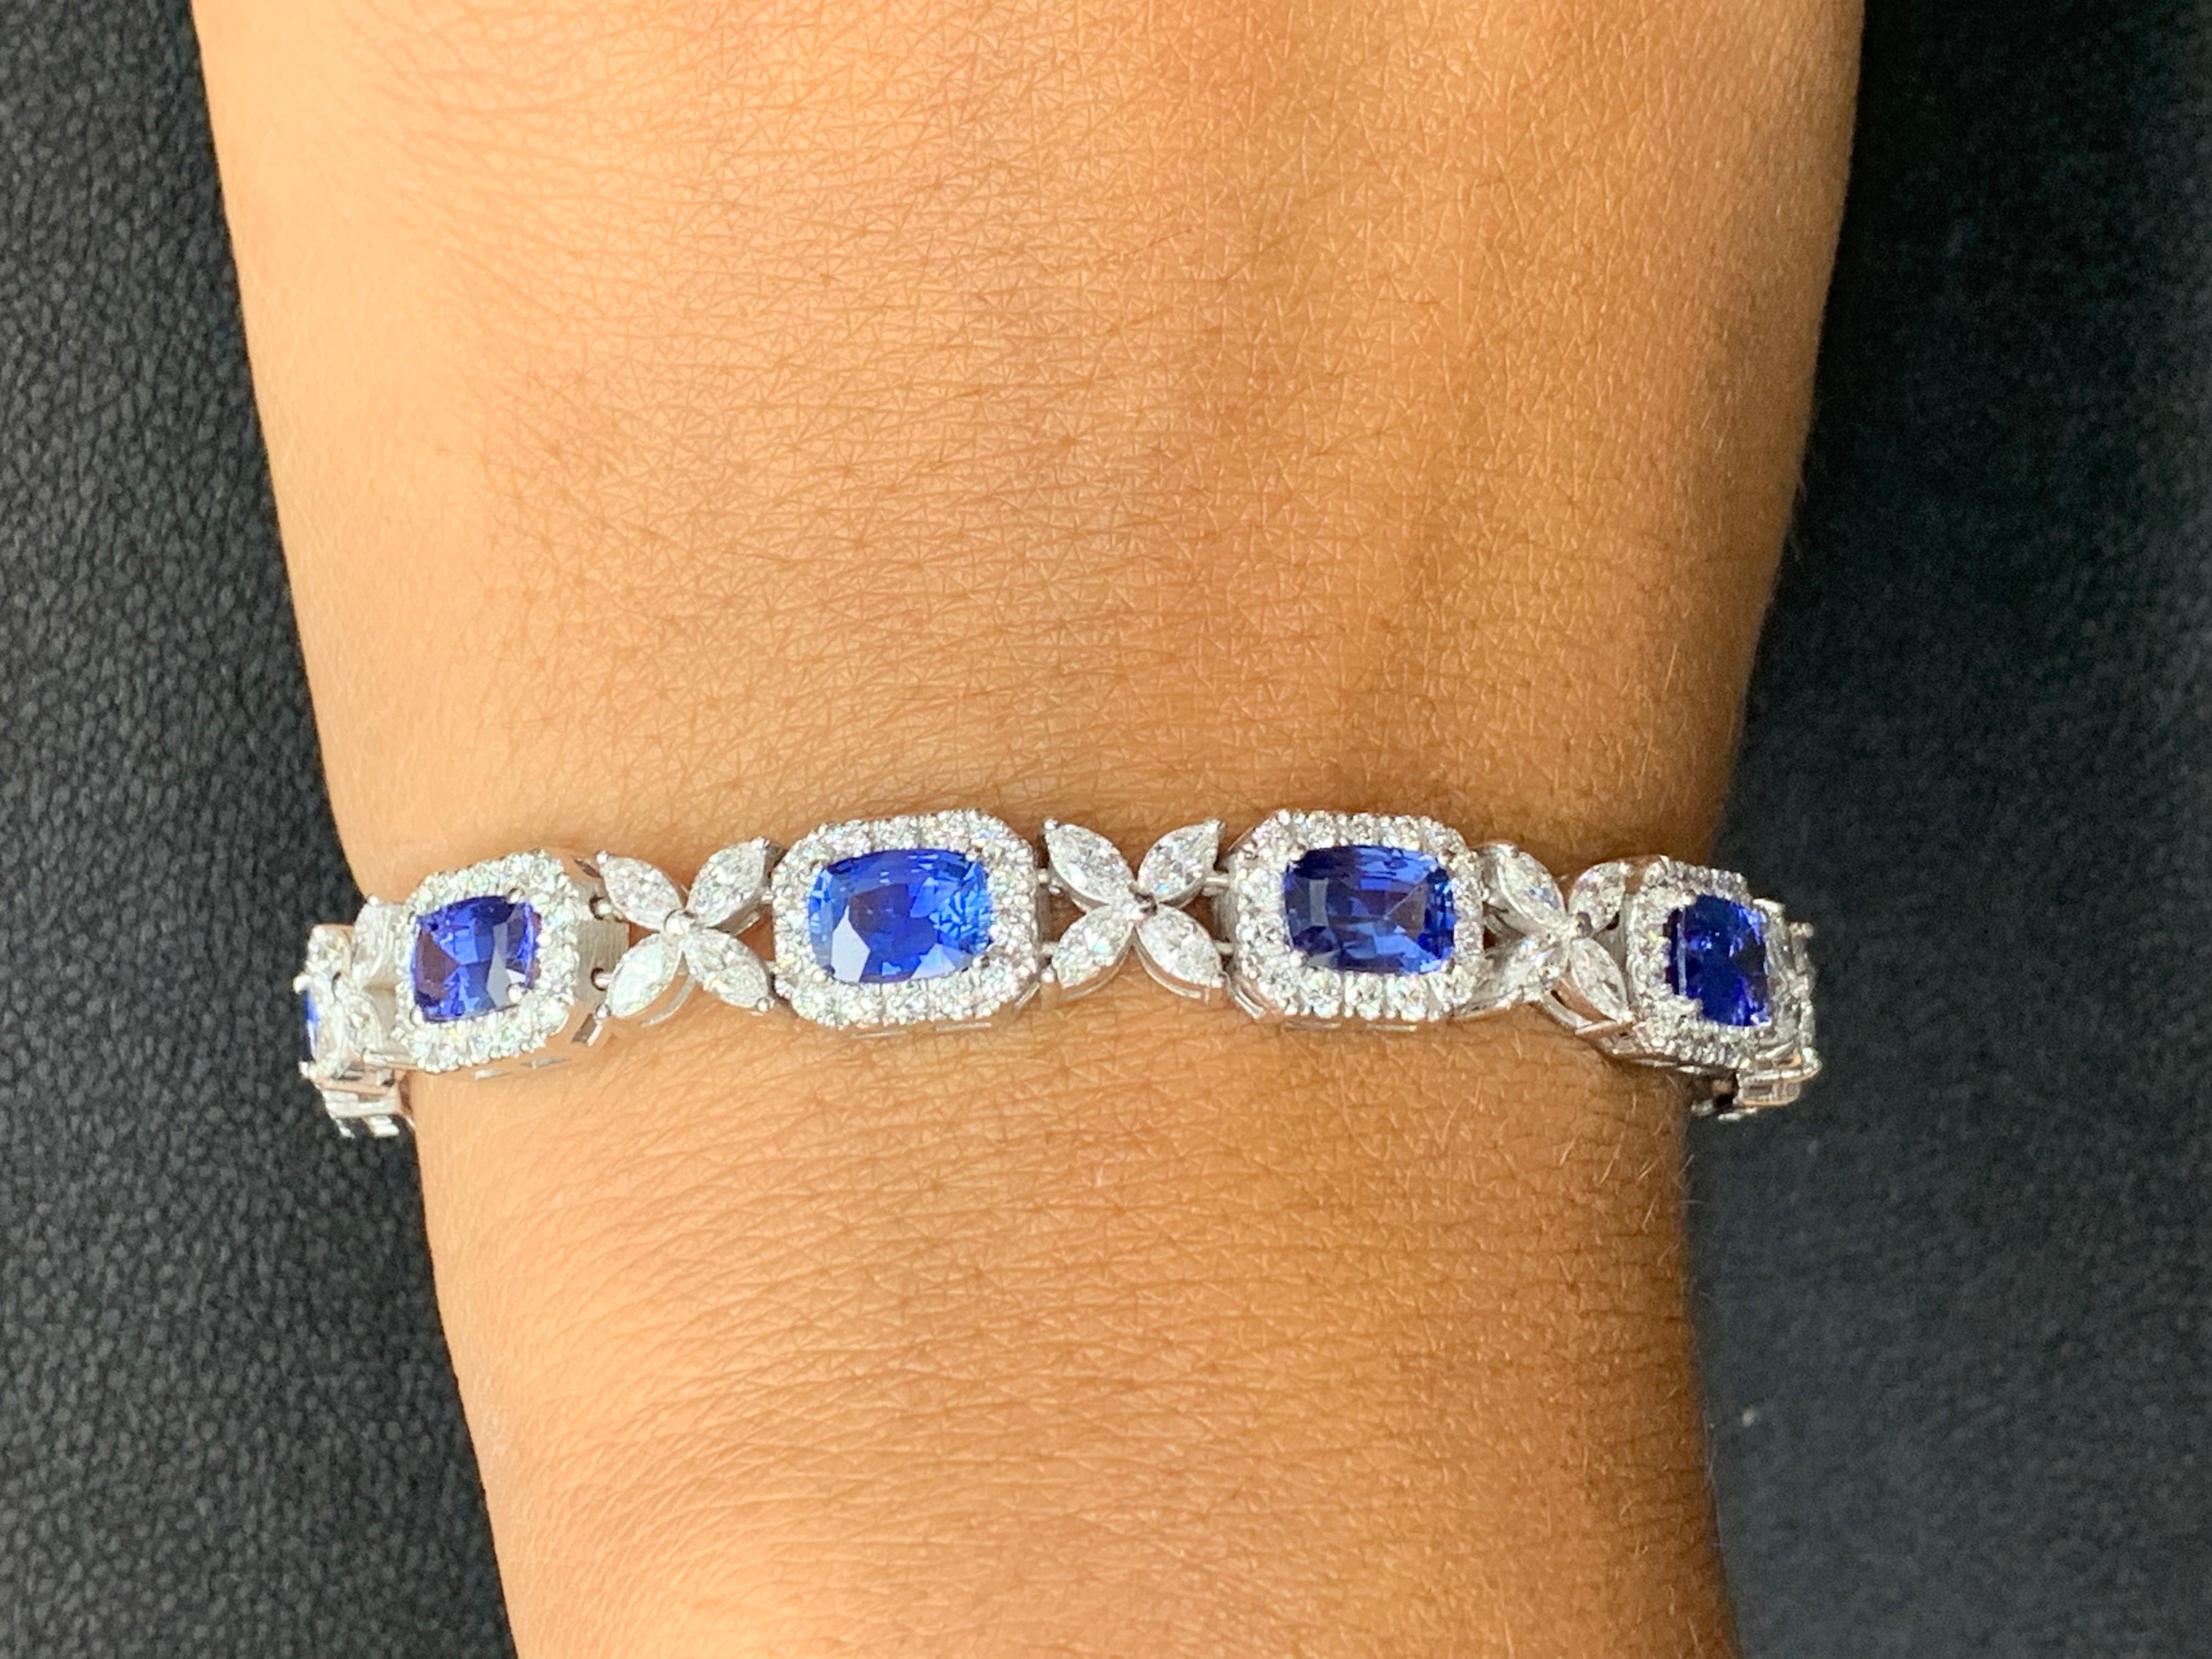 10.47 Carat Cushion cut Sapphire and Diamond Bracelet in 14K White Gold For Sale 4